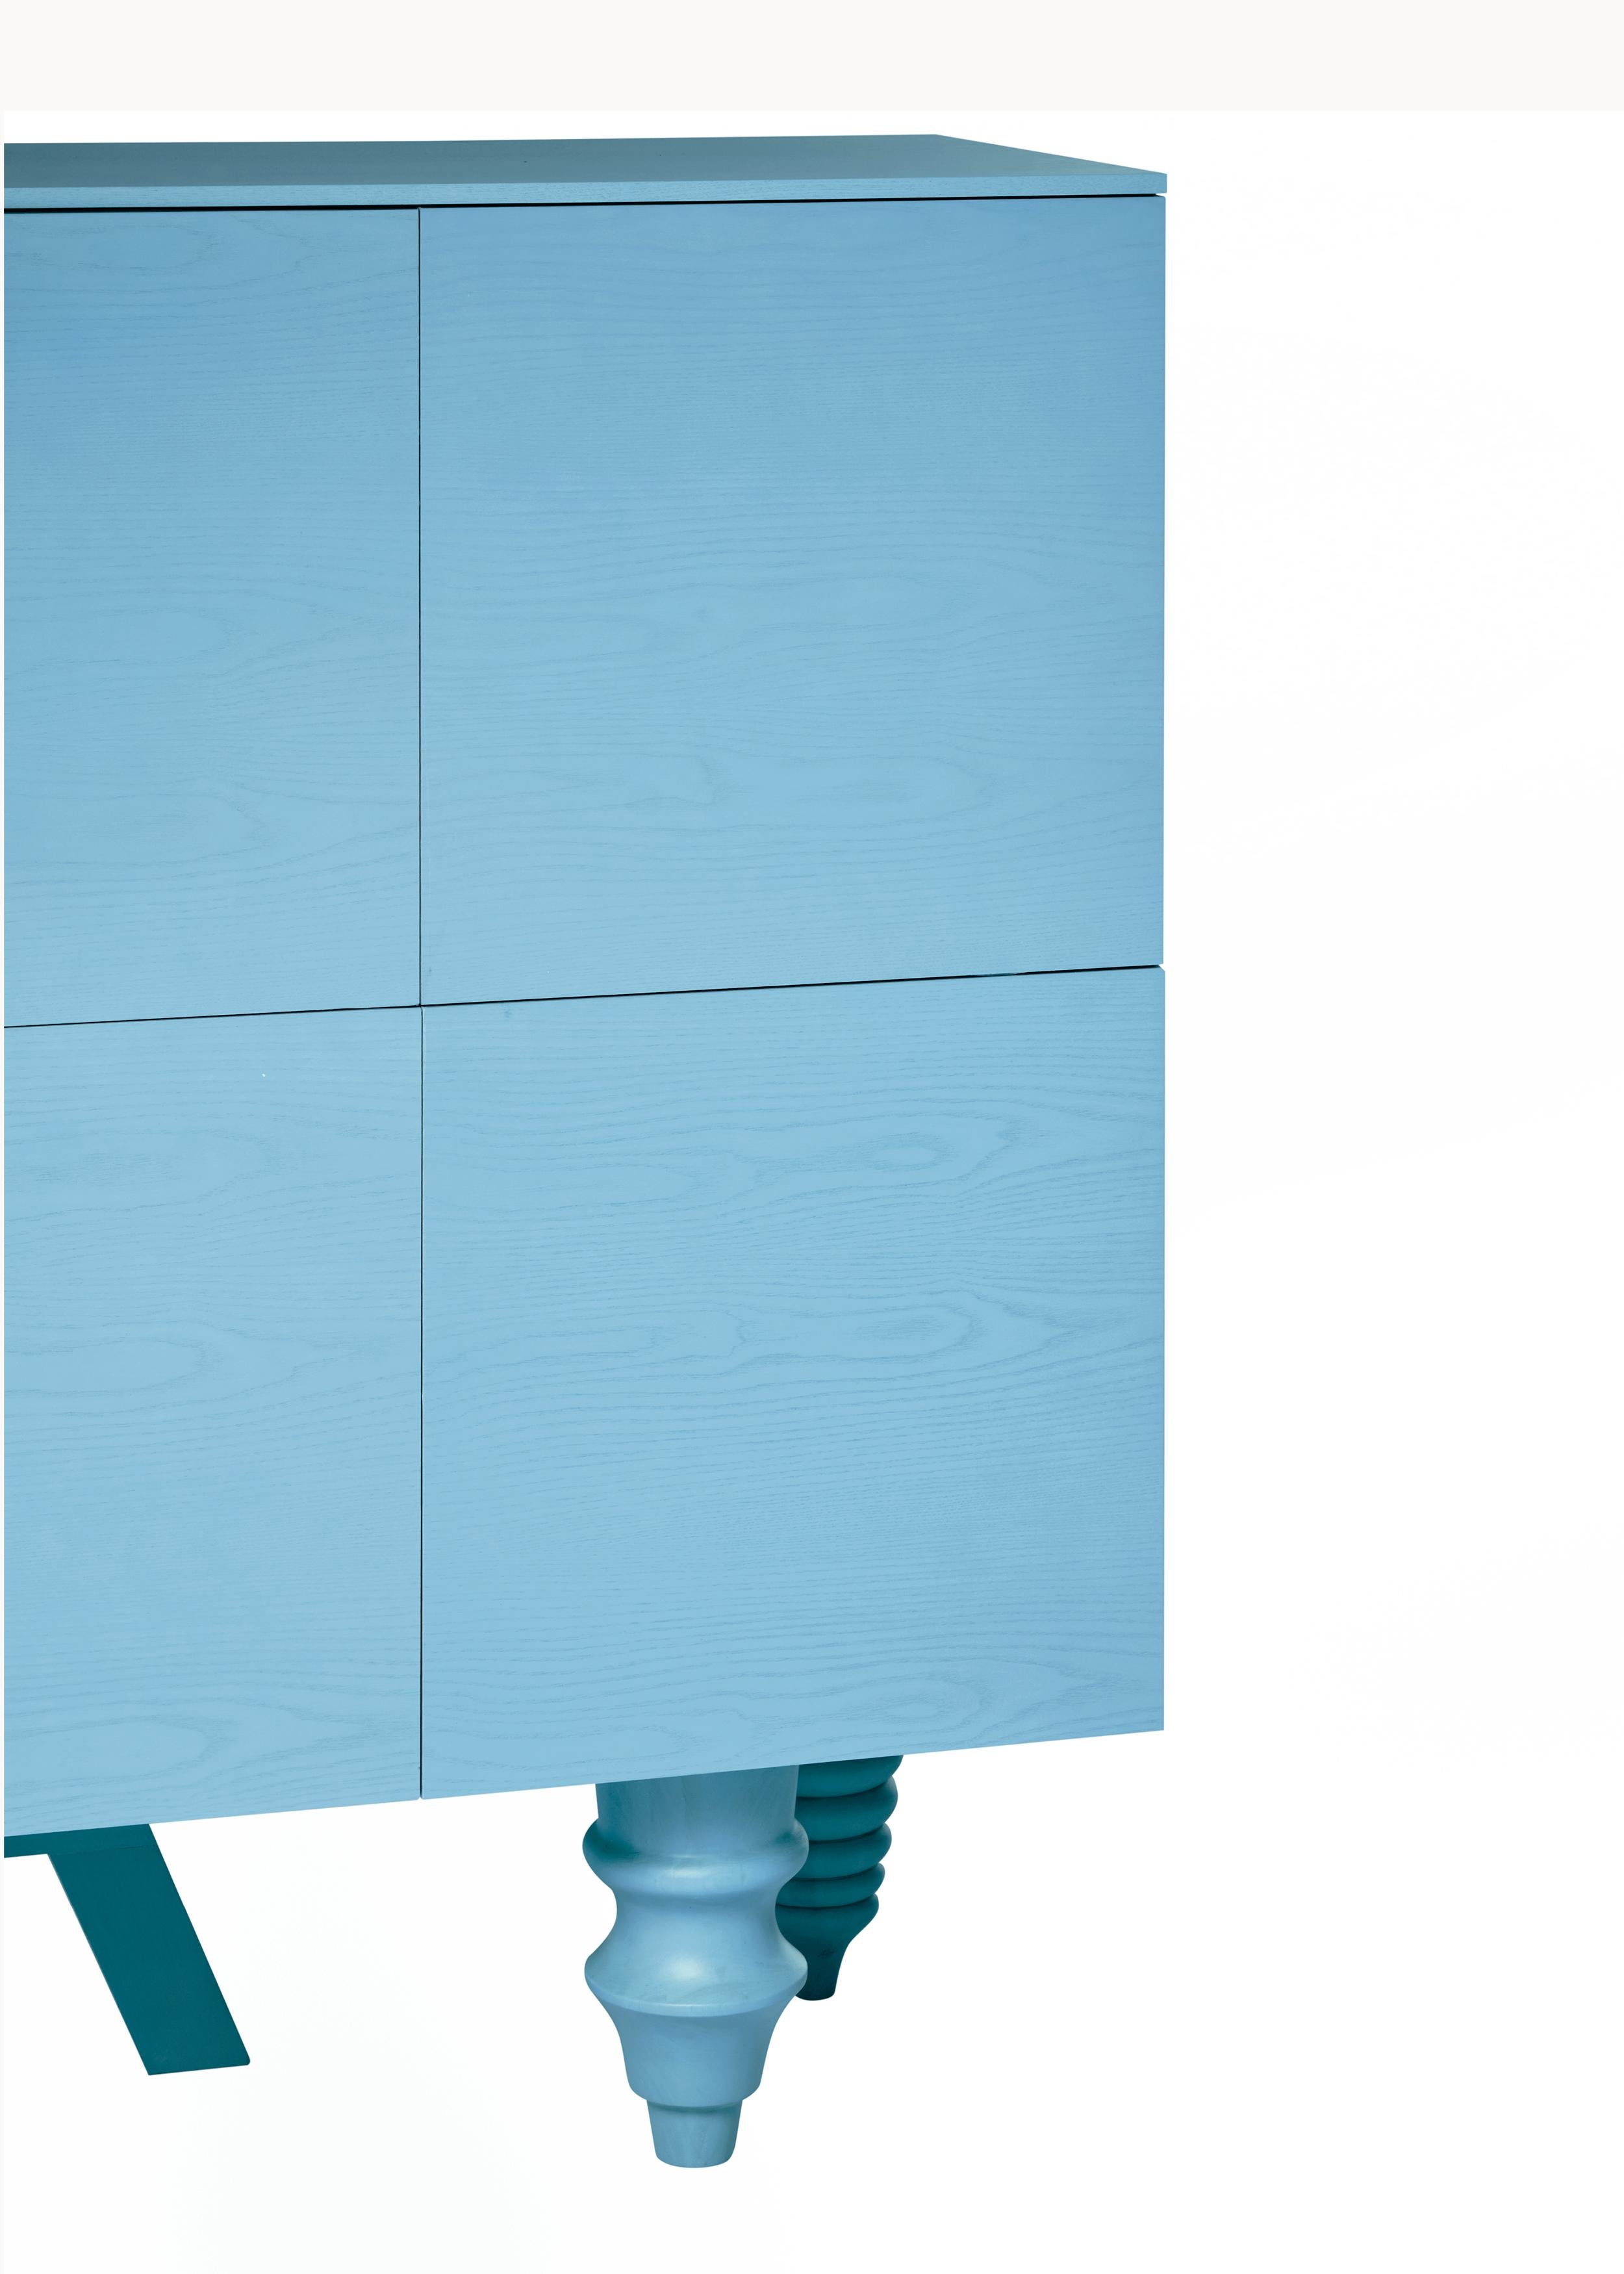 Spanish Contemporary Cabinet 'Multileg' by Jaime Hayon, Ash Top, Blue, 200 cm For Sale